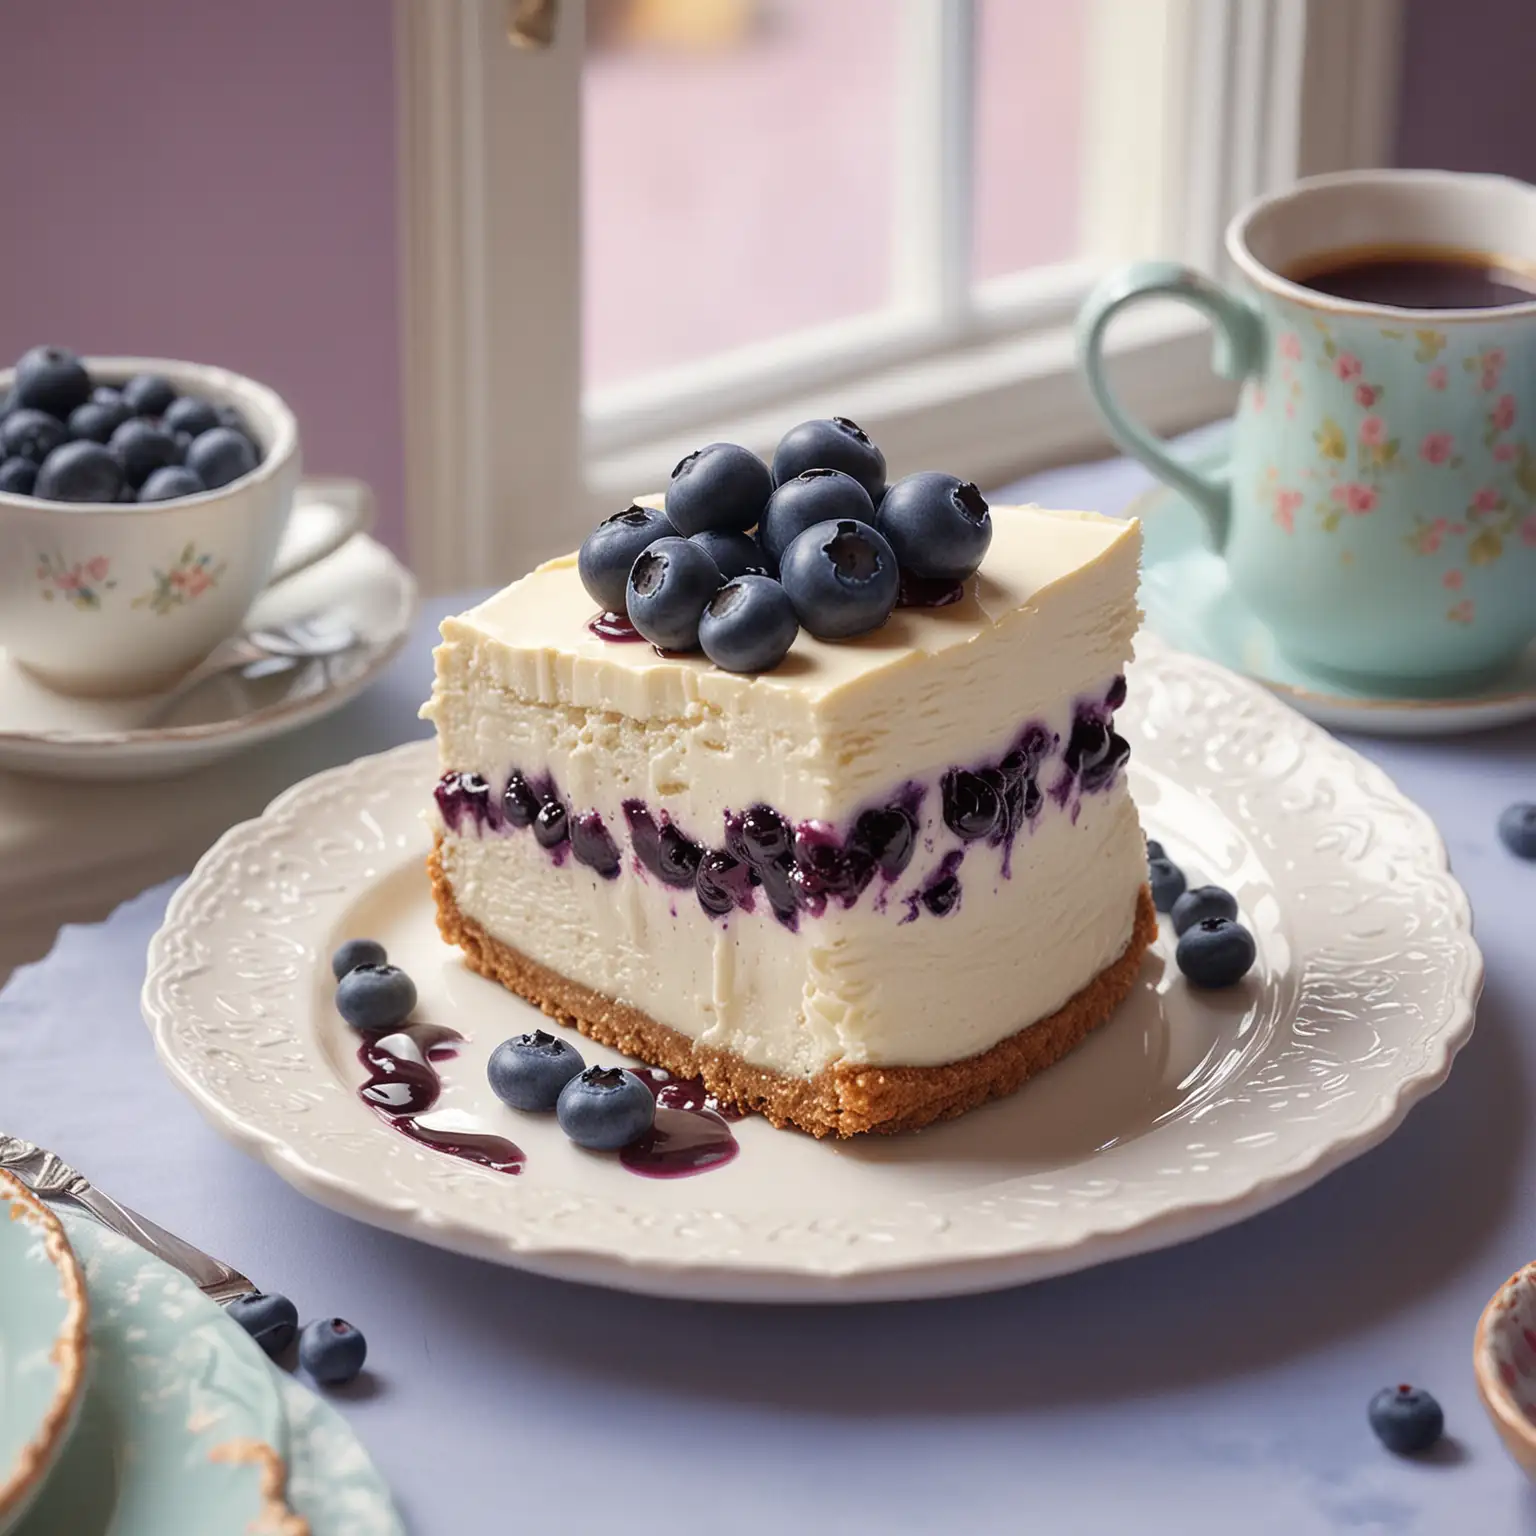 Blueberry Cheesecake Delight Irresistible NoBake Treat in a Charming Cafe Ambiance